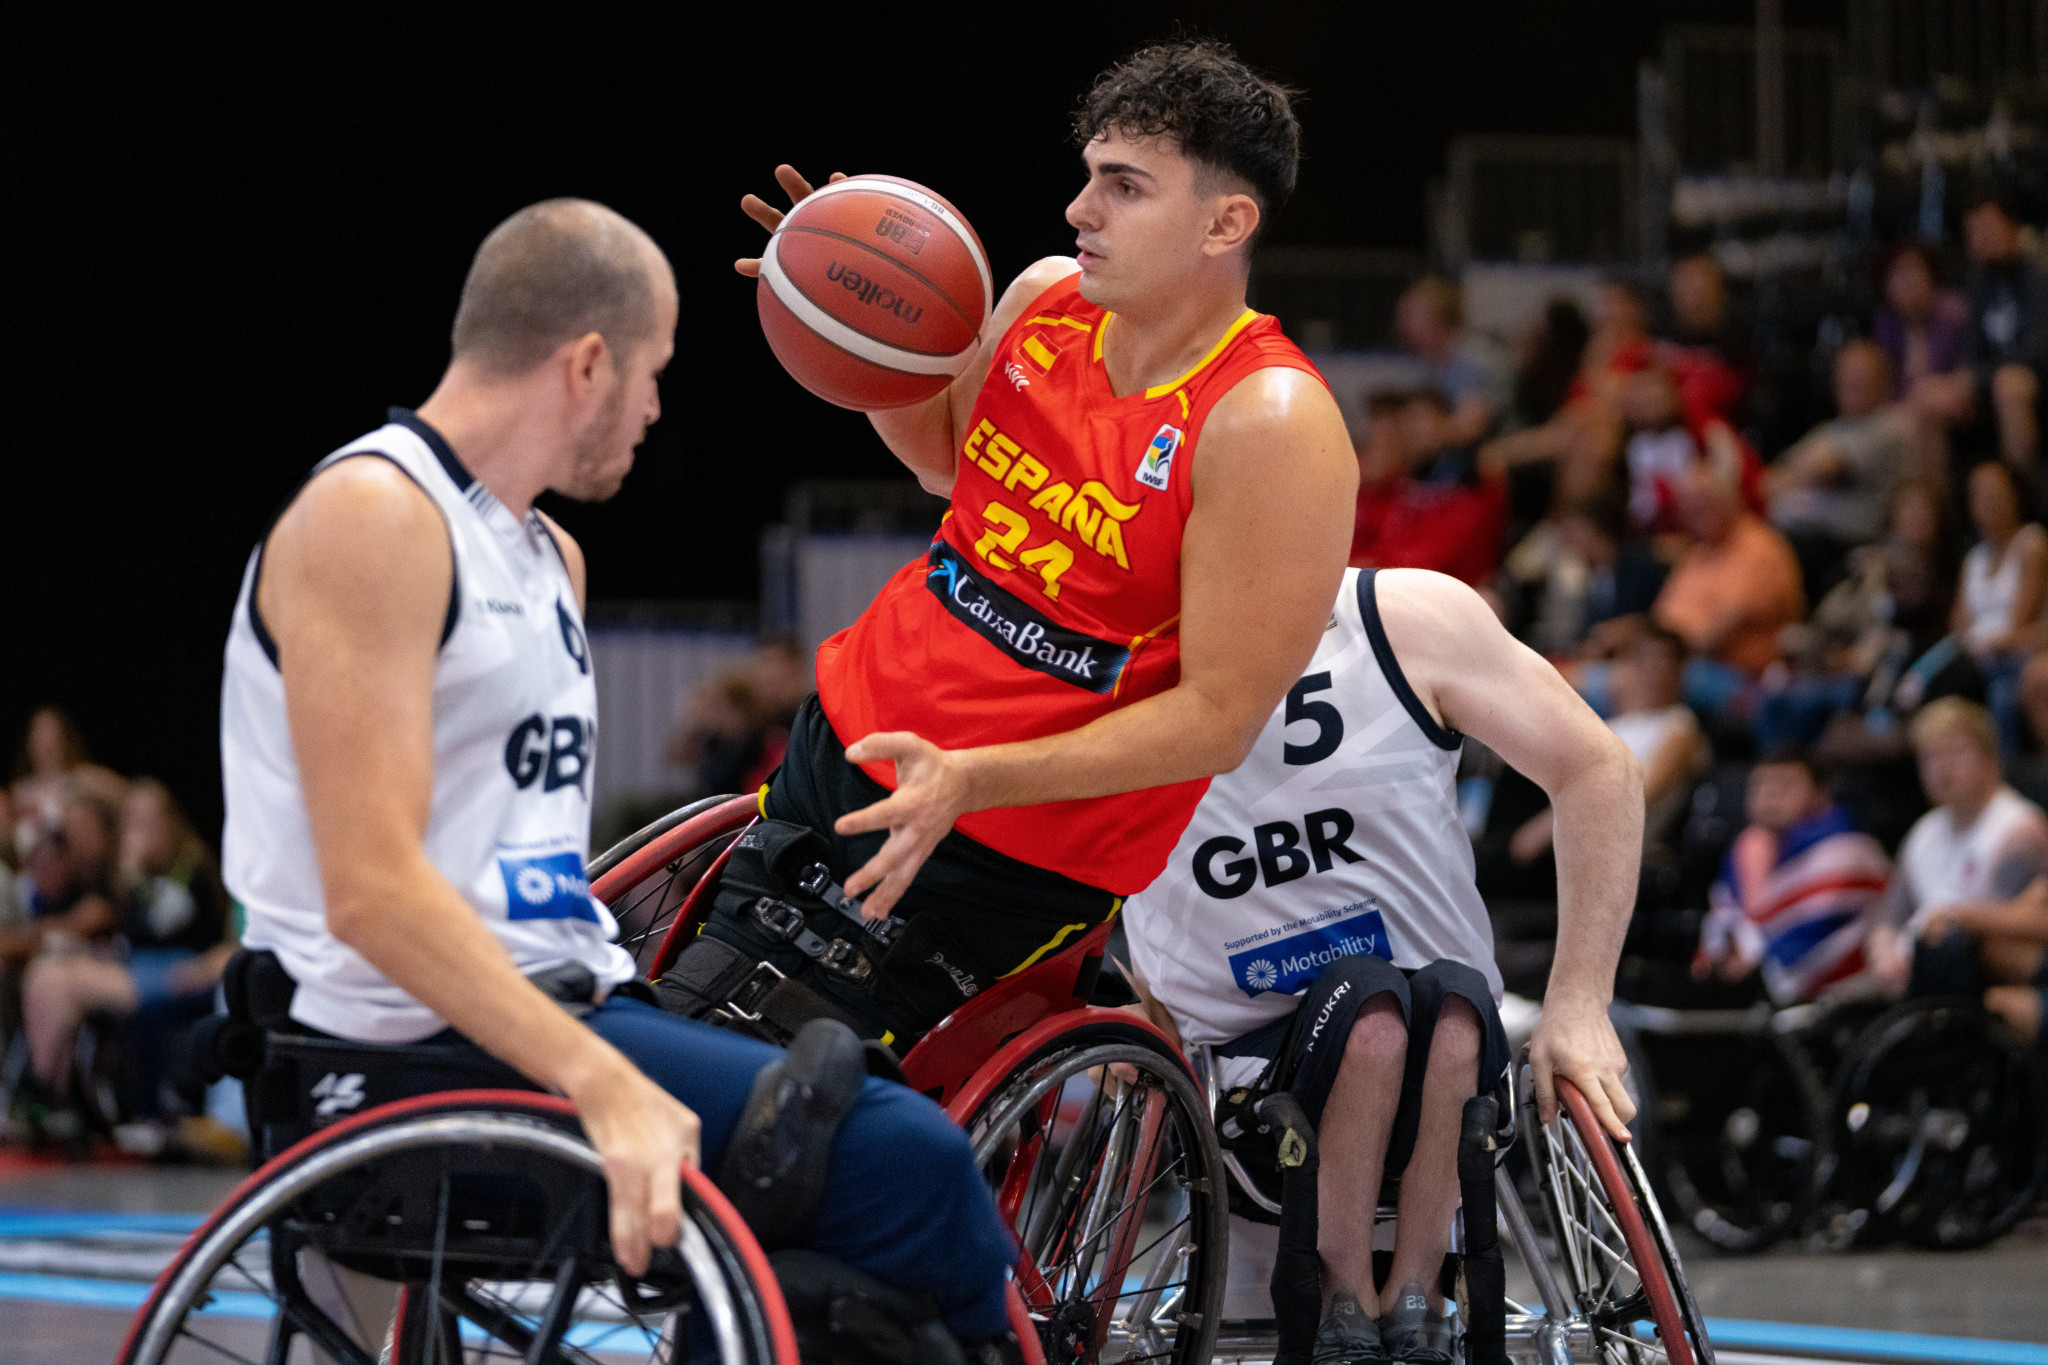 Spain had downed defending champions and hosts The Netherlands in the semi-finals but came unstuck against Britain in the gold-medal match ©EPC